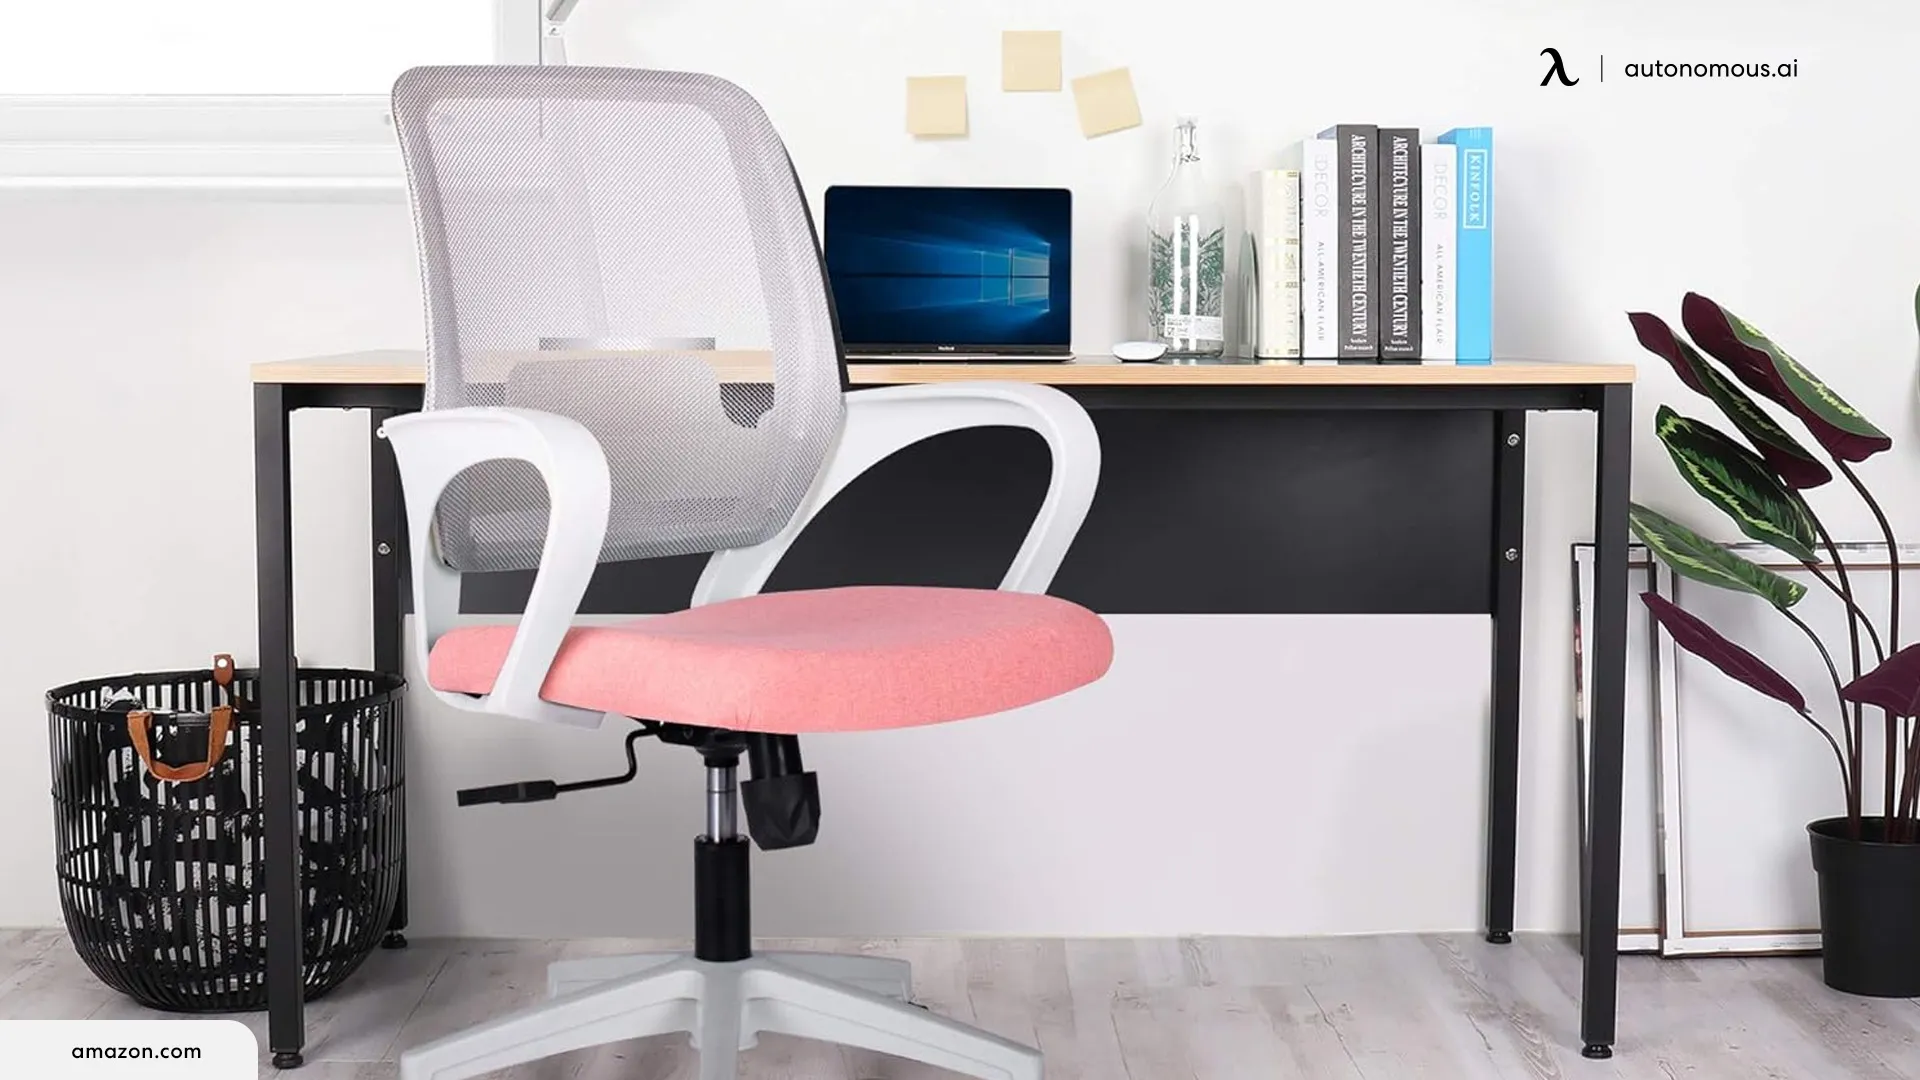 NEO CHAIR - pink mesh office chair